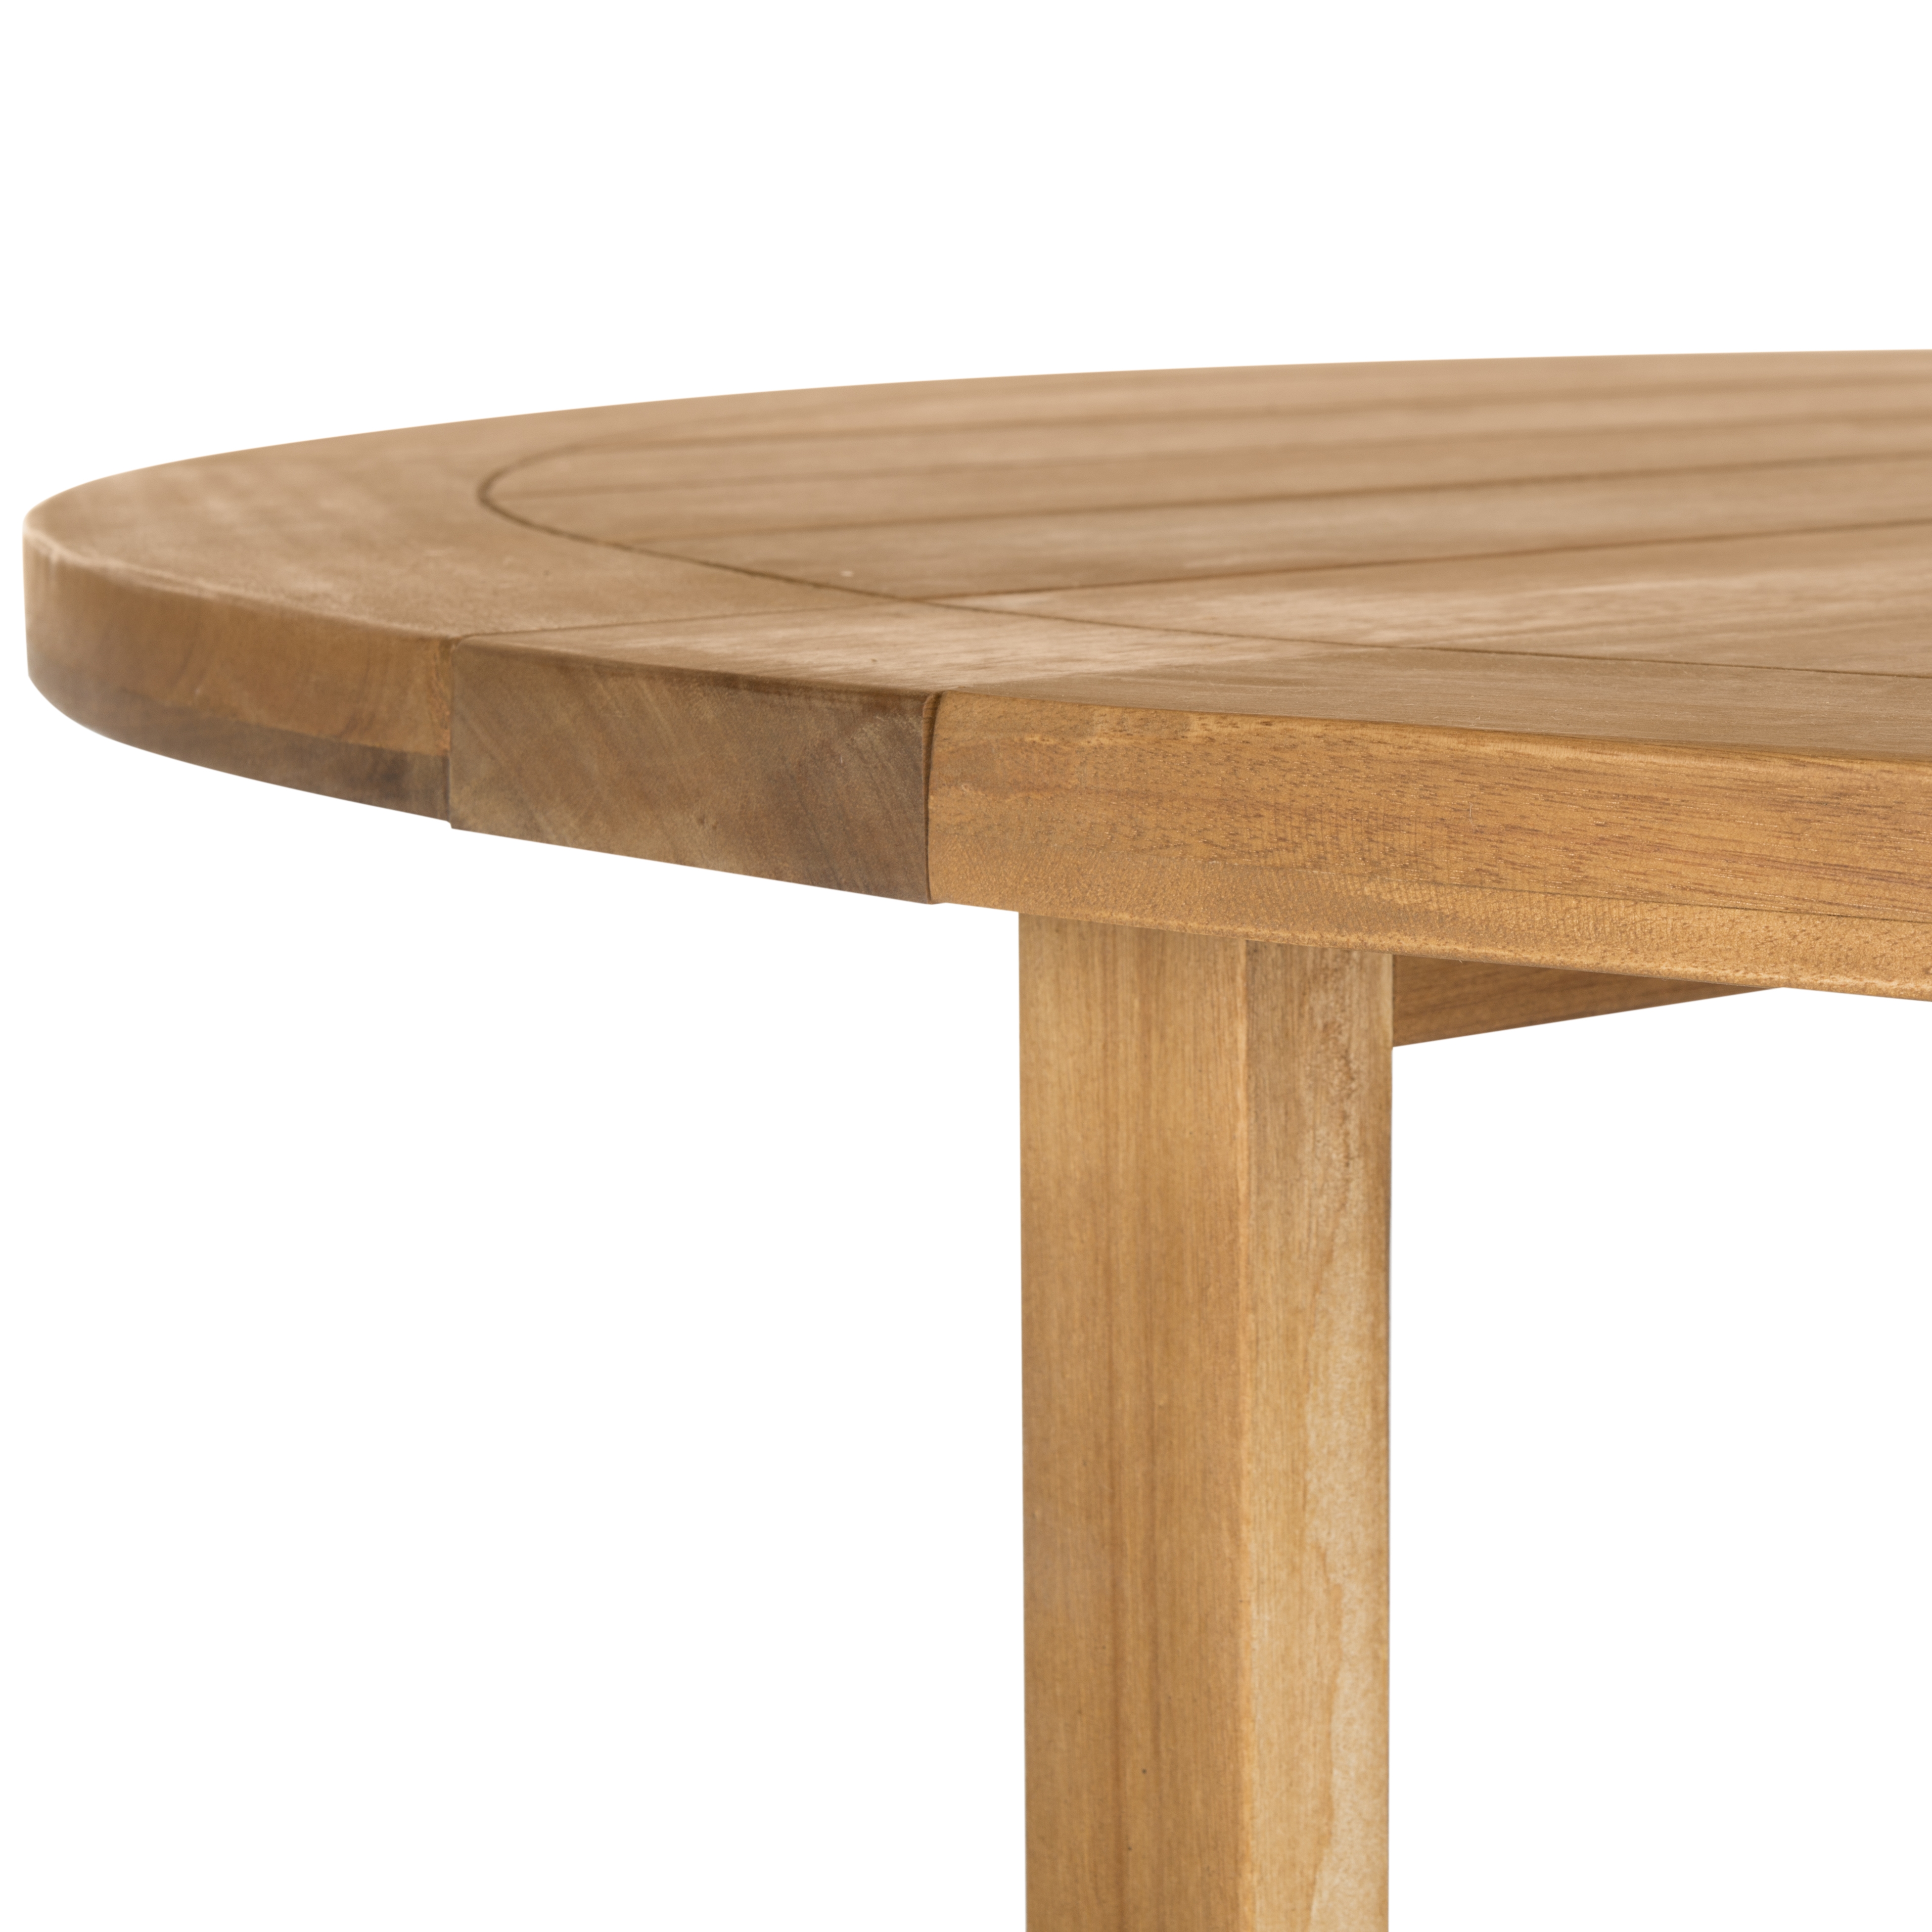 Wales Round 47.24-Inch Dia Dining Table - Natural - Arlo Home - Image 1